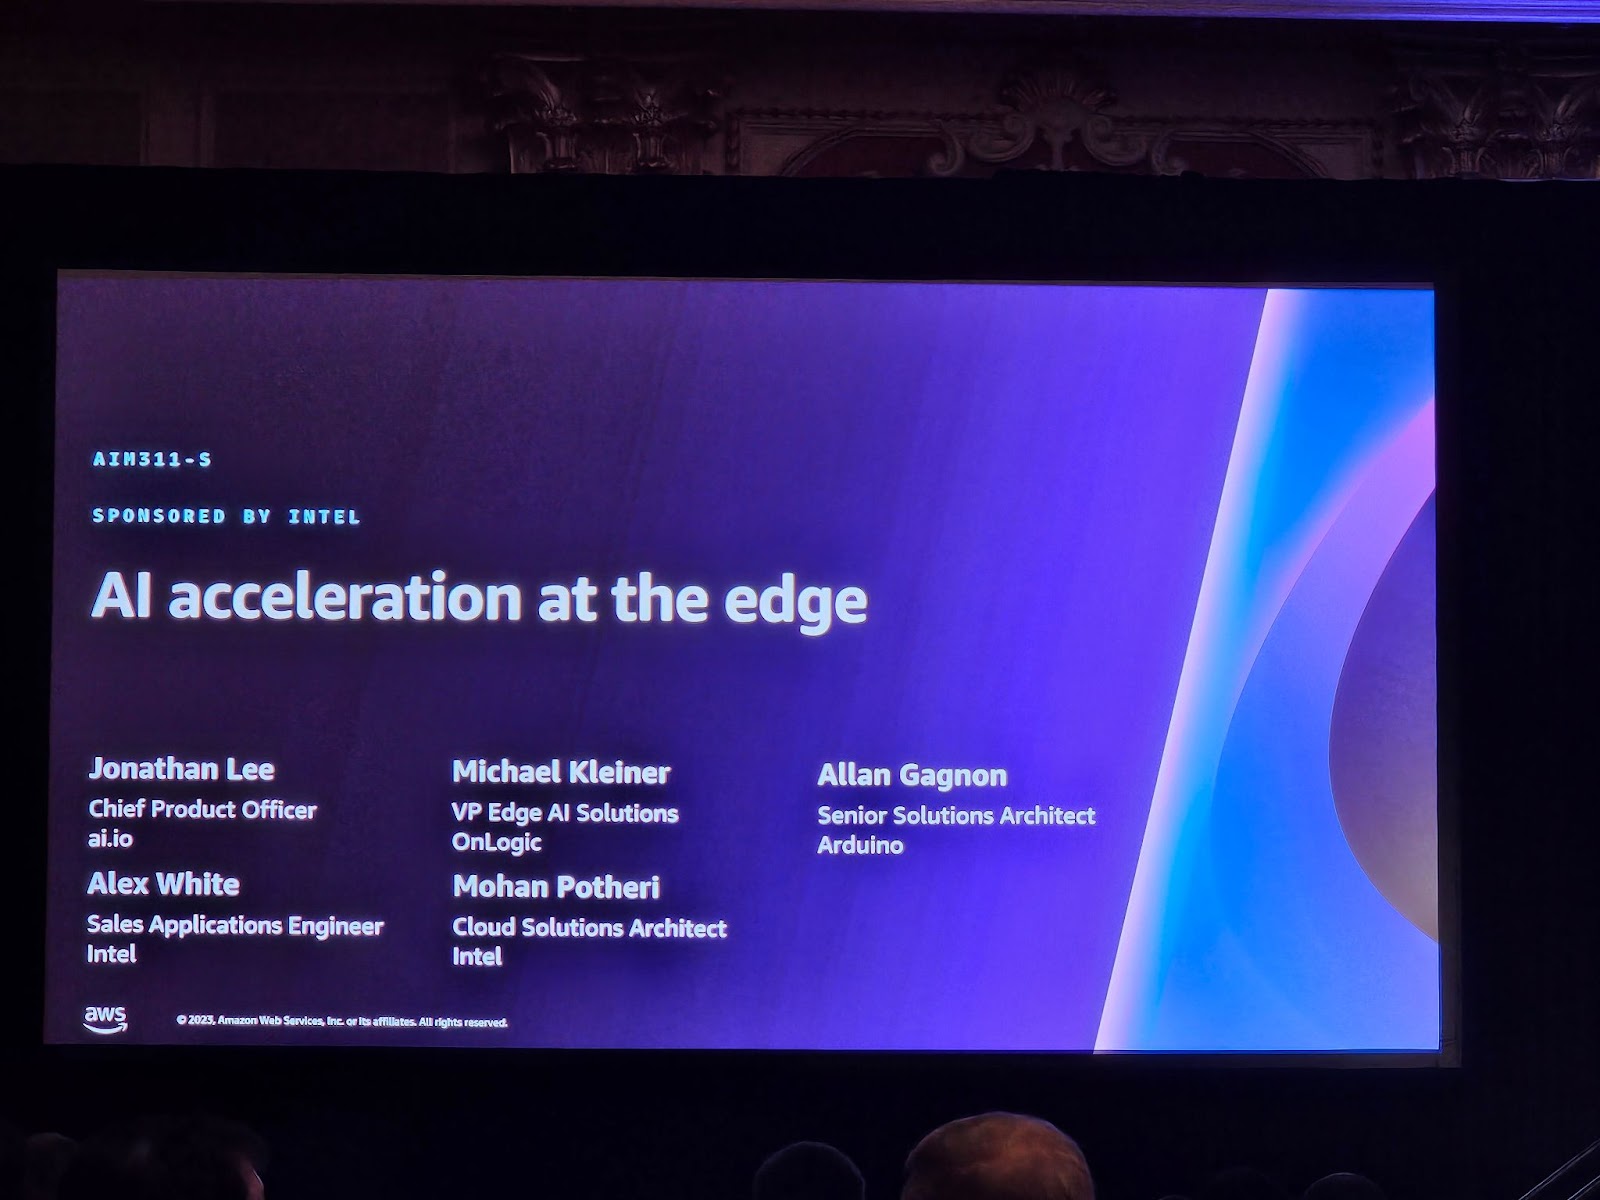 AI acceleration at the edge(sponsored by Intel)